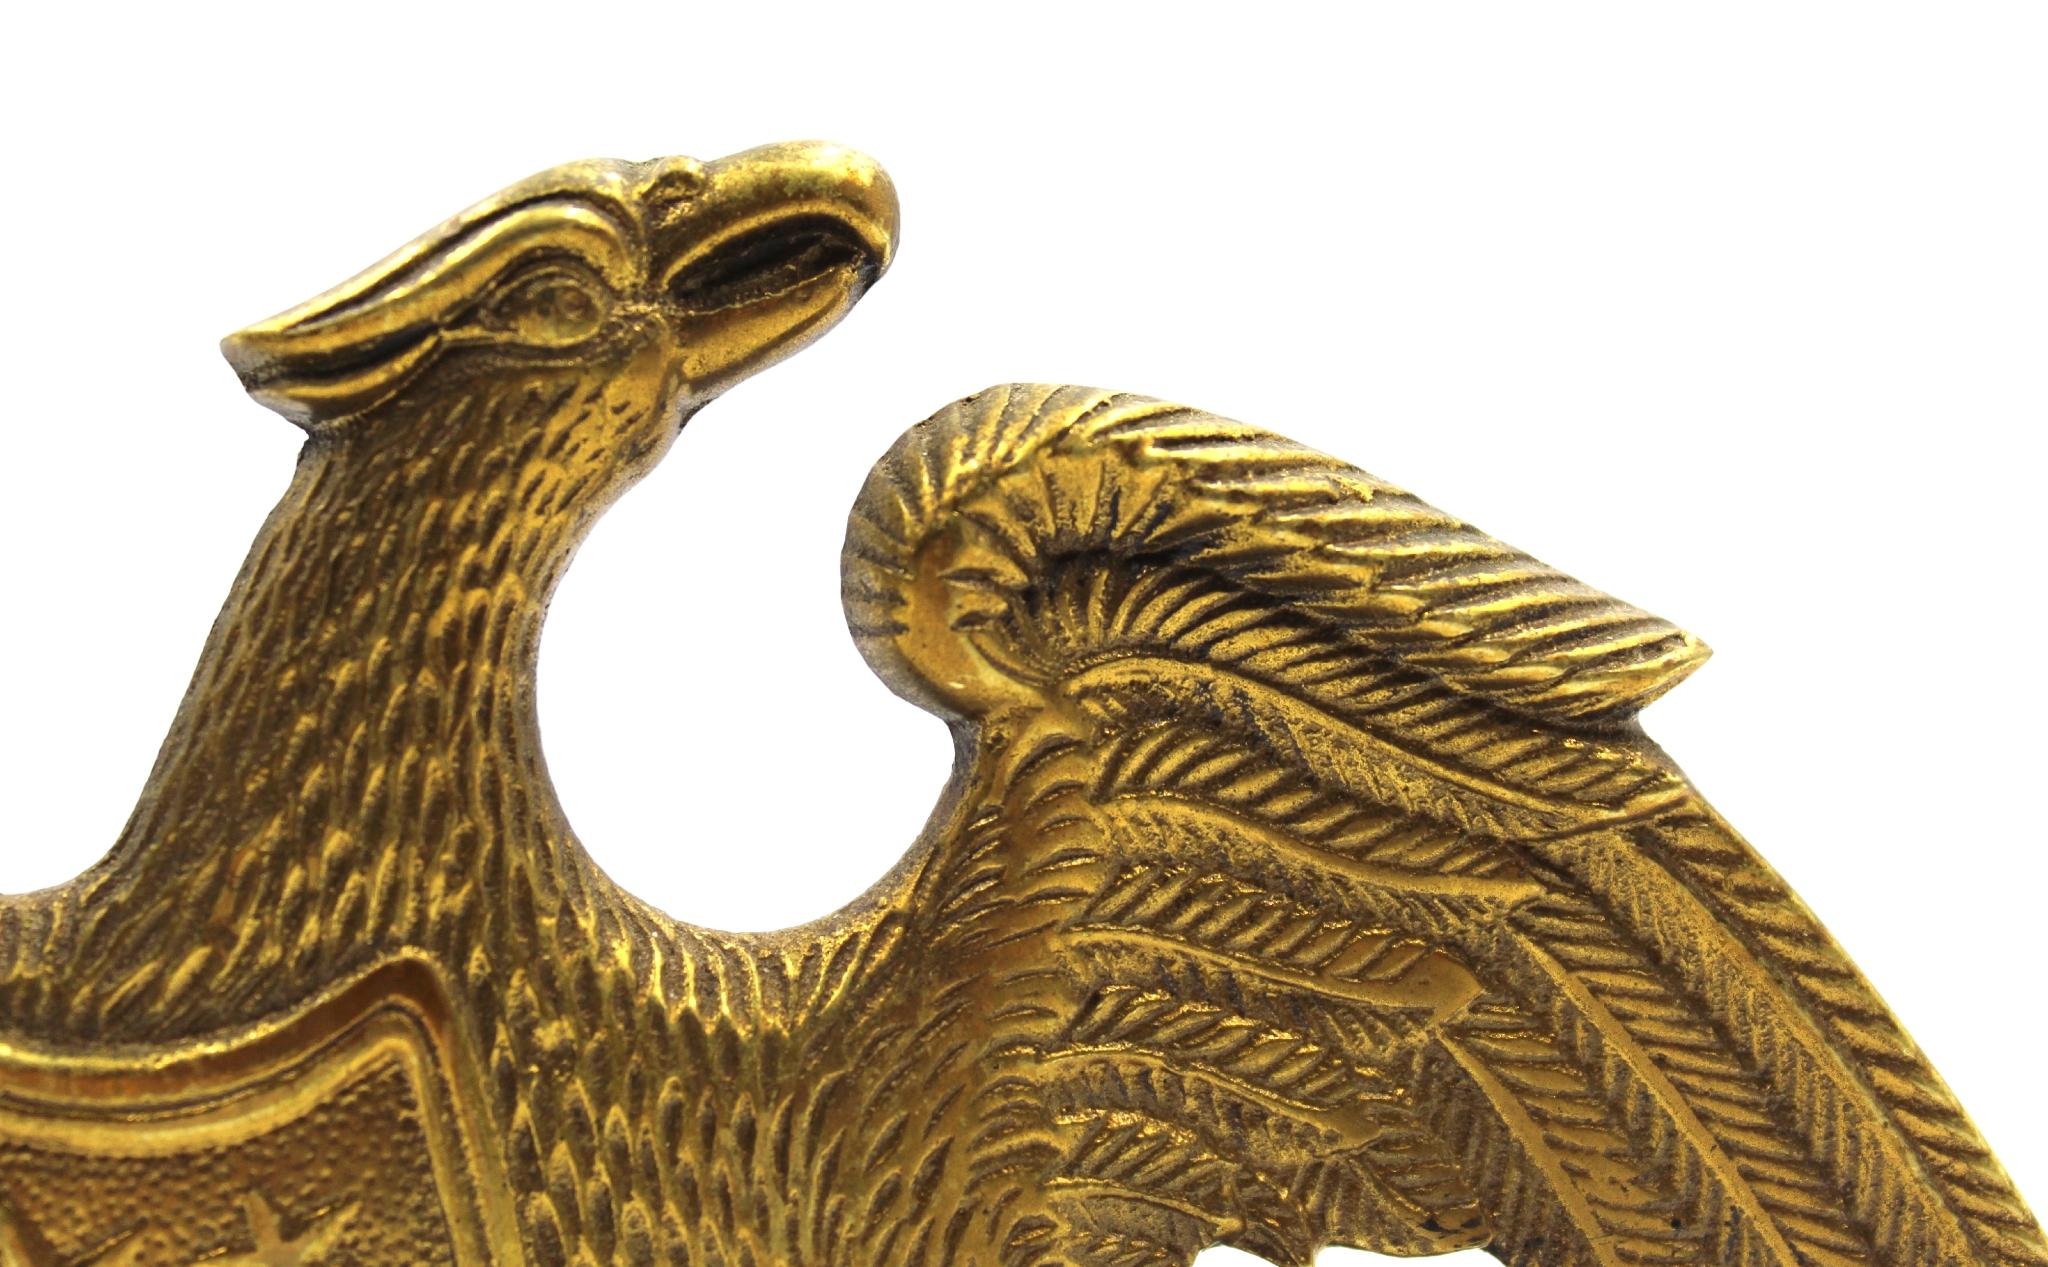 American Vintage Spreadwing Brass Eagle Bookends by Virginia Metalcrafters, 1952